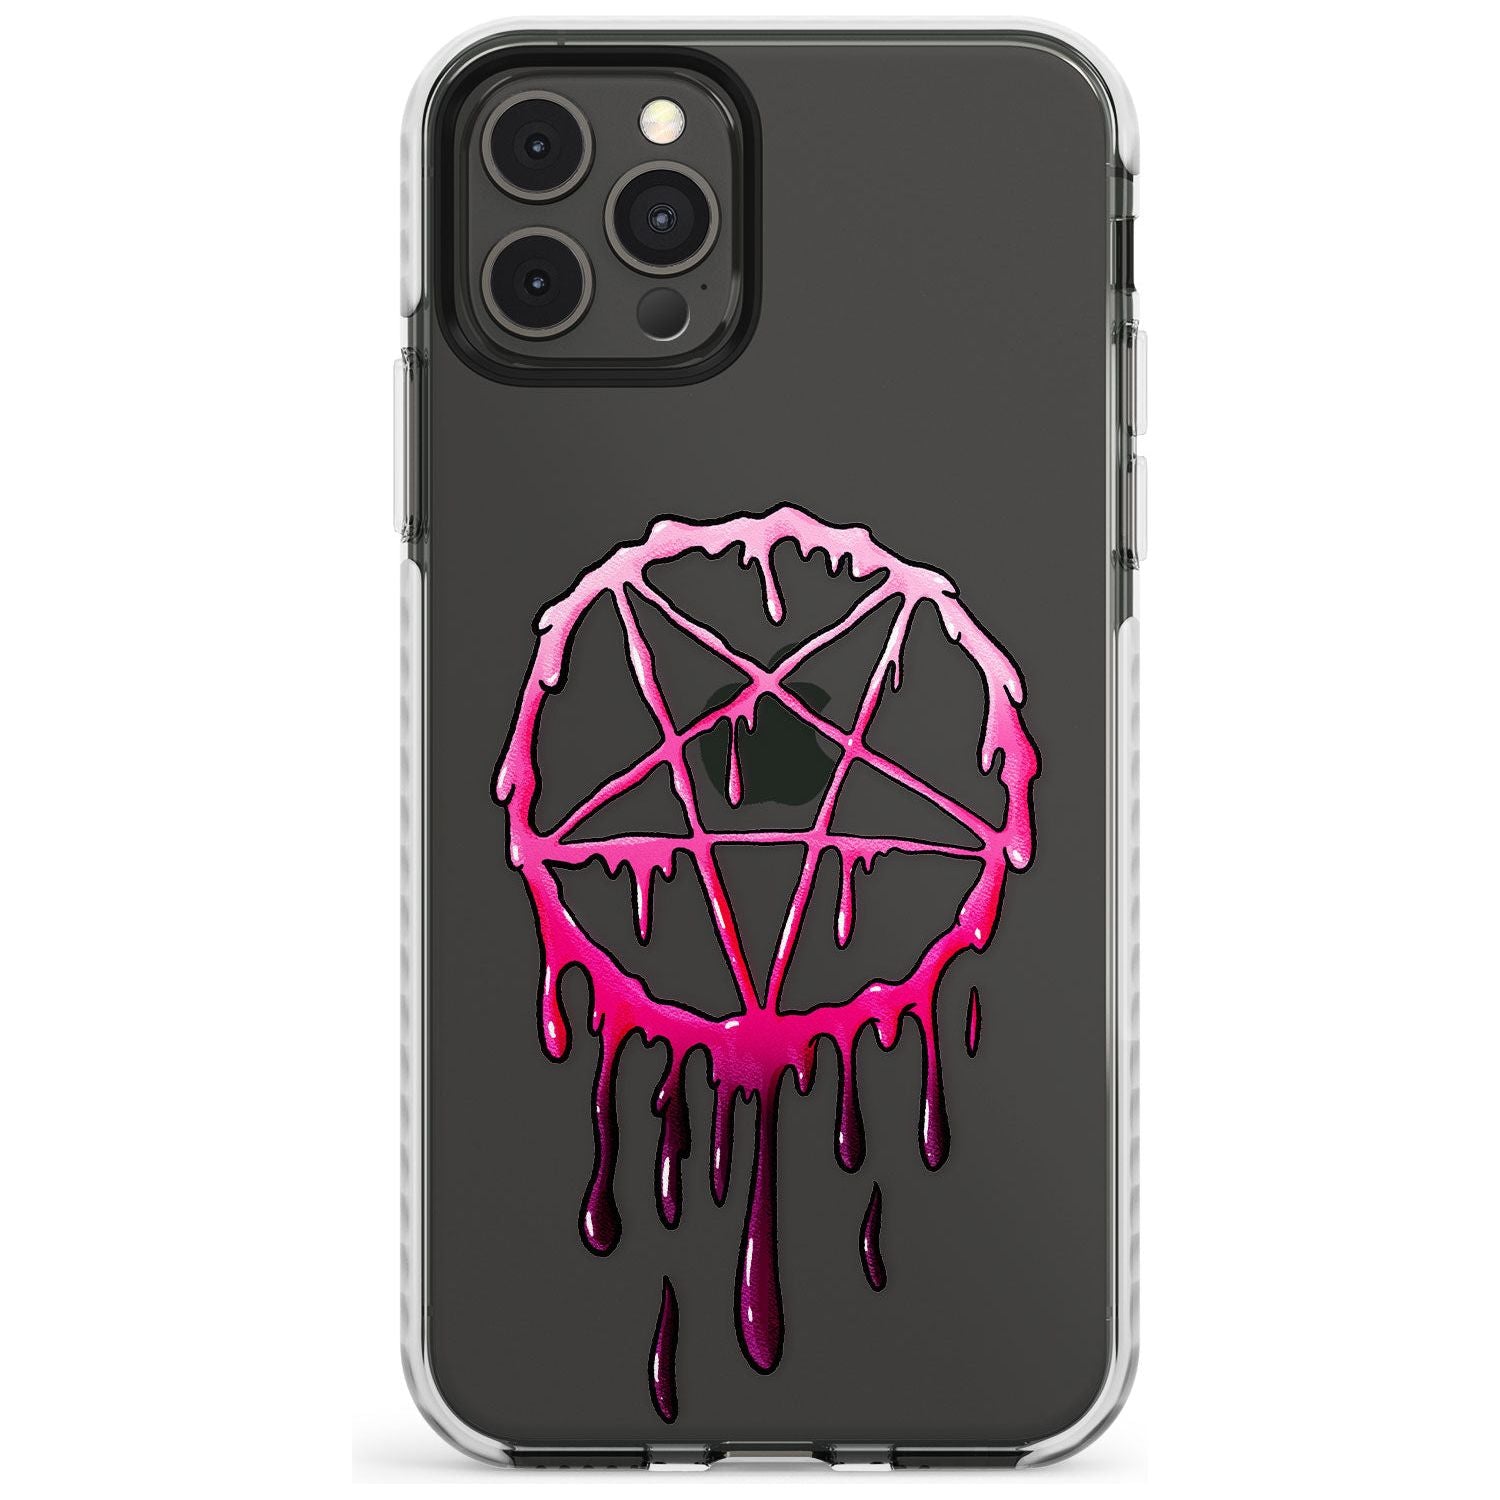 Pentagram of Blood Impact Phone Case for iPhone 11 Pro Max